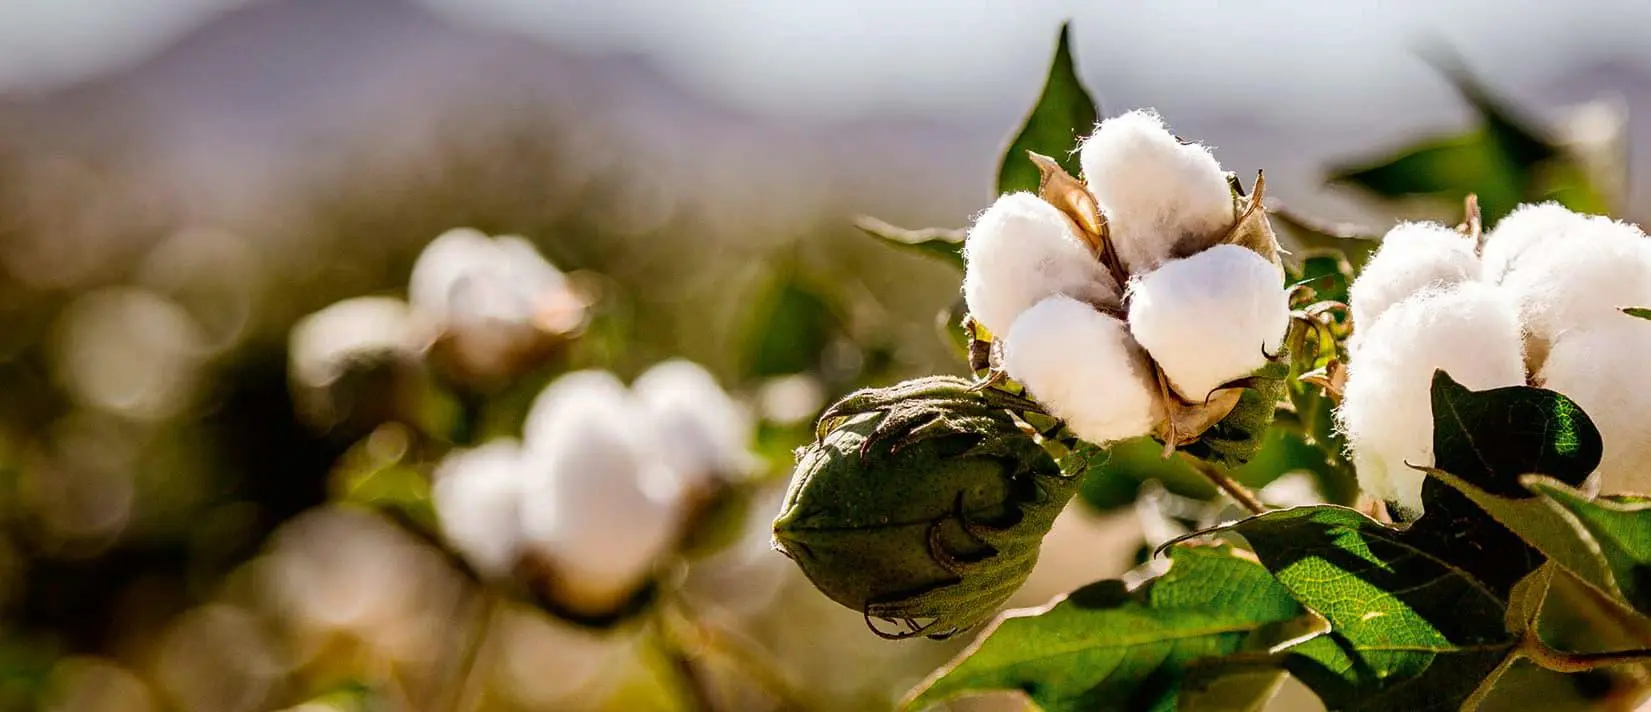 Textile Industry Pushes Organic Cotton Idea More Than Function